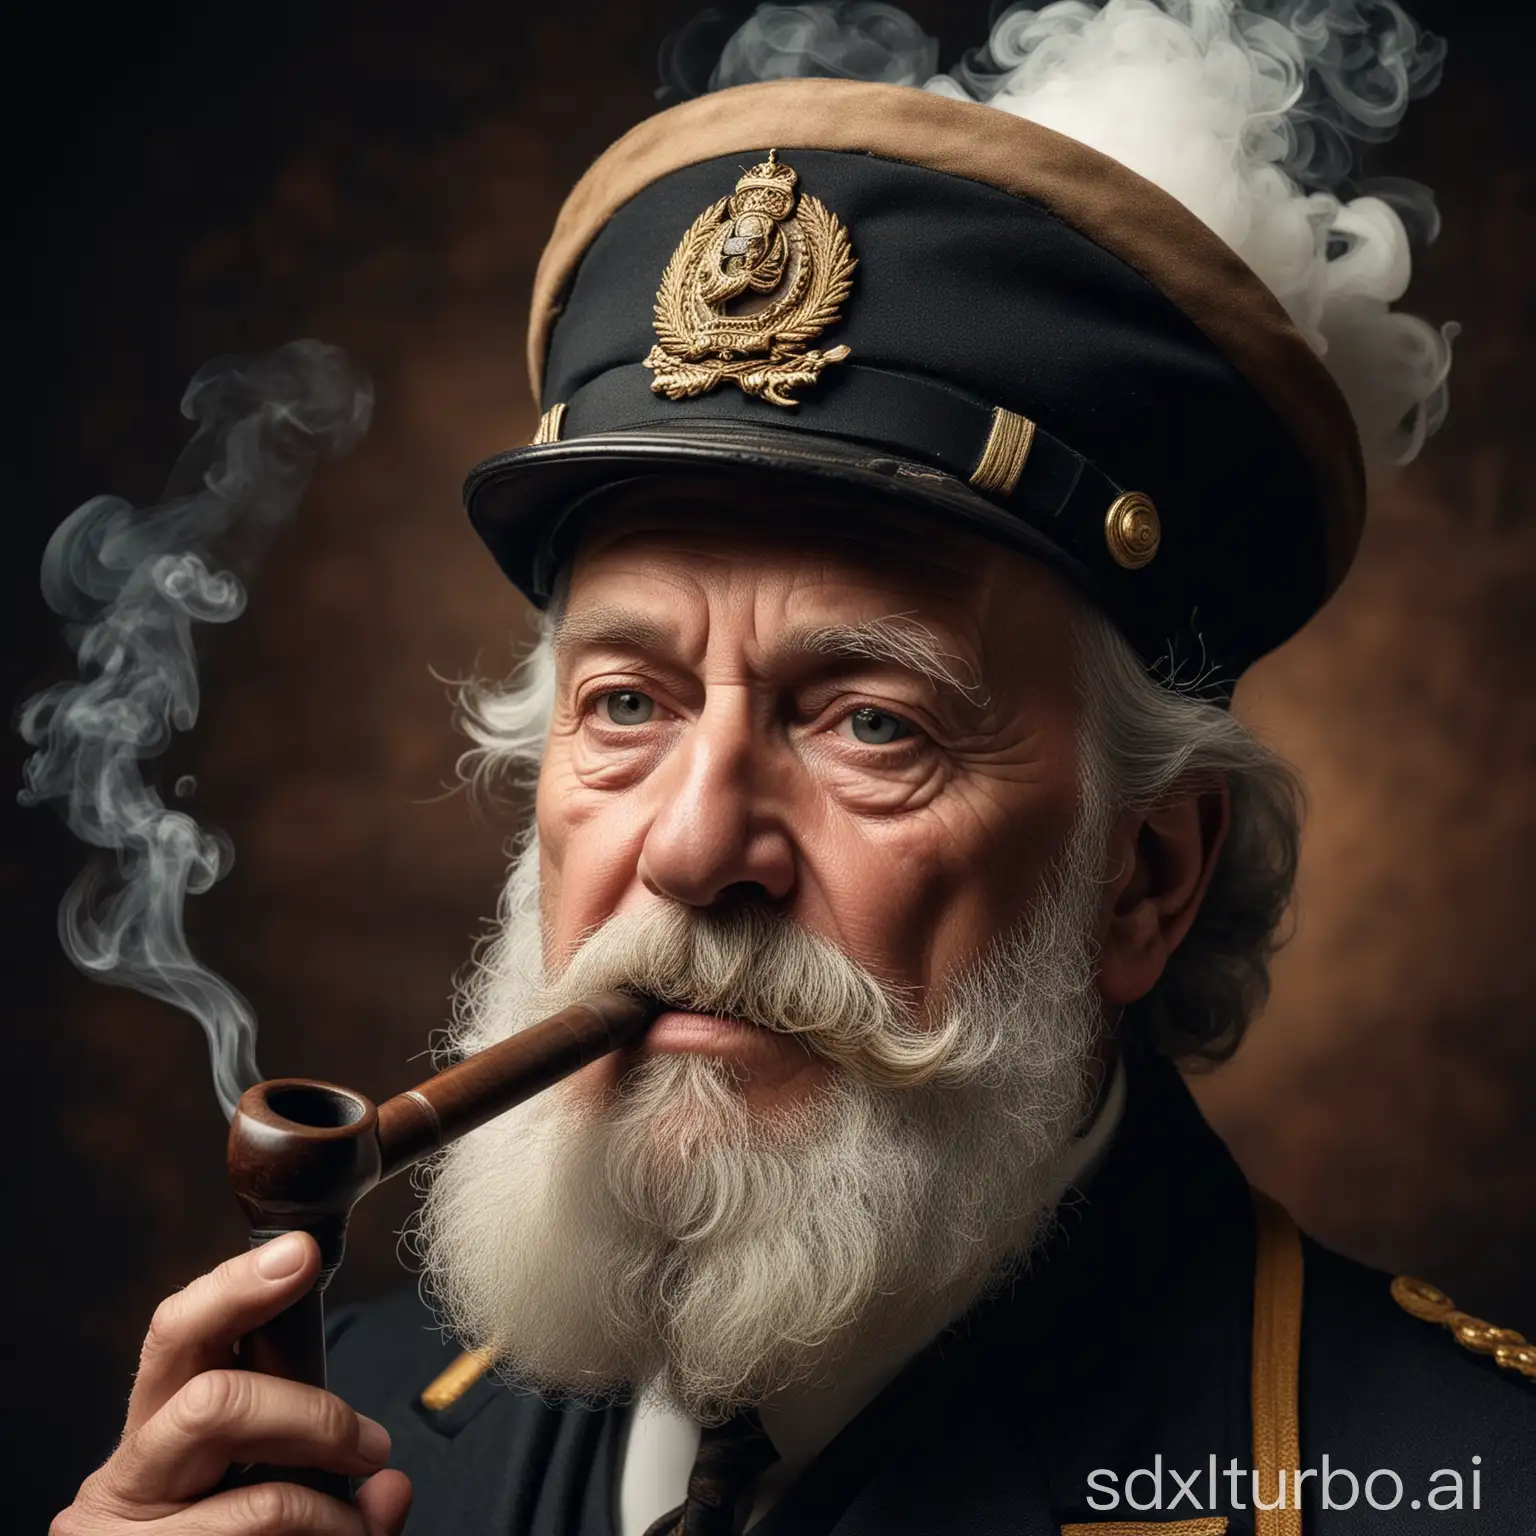 Sharp photo. Portrait of an old captain with a pipe in his mouth and a captain's hat. He should have a full beard, the face is wrinkled. Smoke rises from the tobacco pipe.